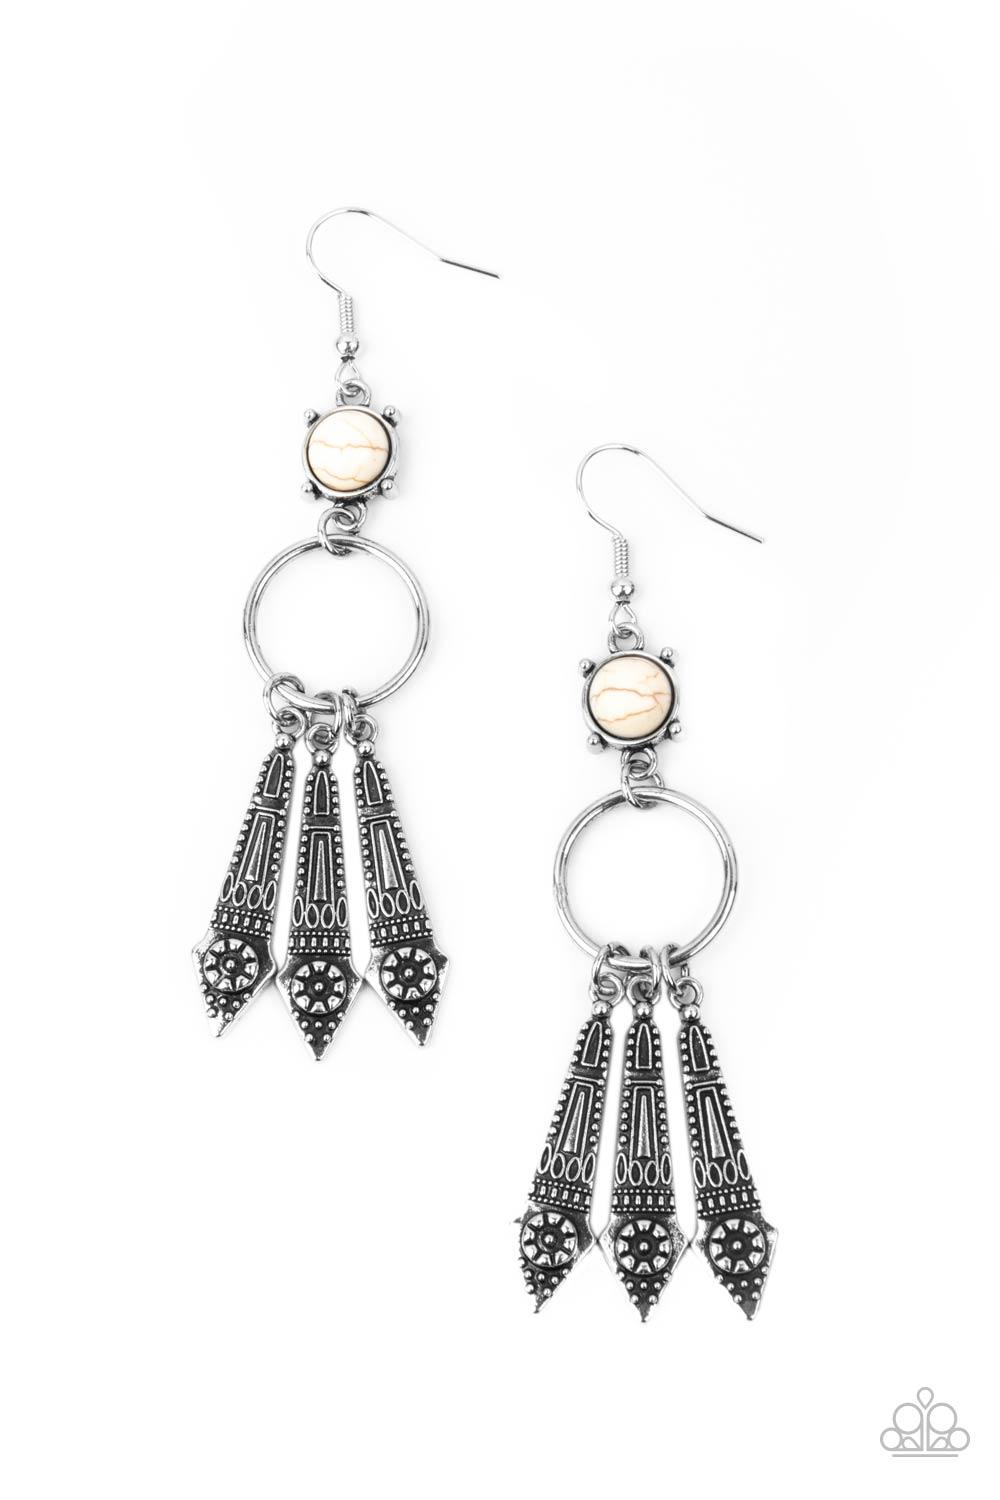 Paparazzi Accessories Prana Paradise - White Embellished with dainty flowers, flared silver bars glide along the bottom of a dainty silver ring that attaches to a white stone fitting, creating a whimsical lure. Earring attaches to a standard fishhook fitt